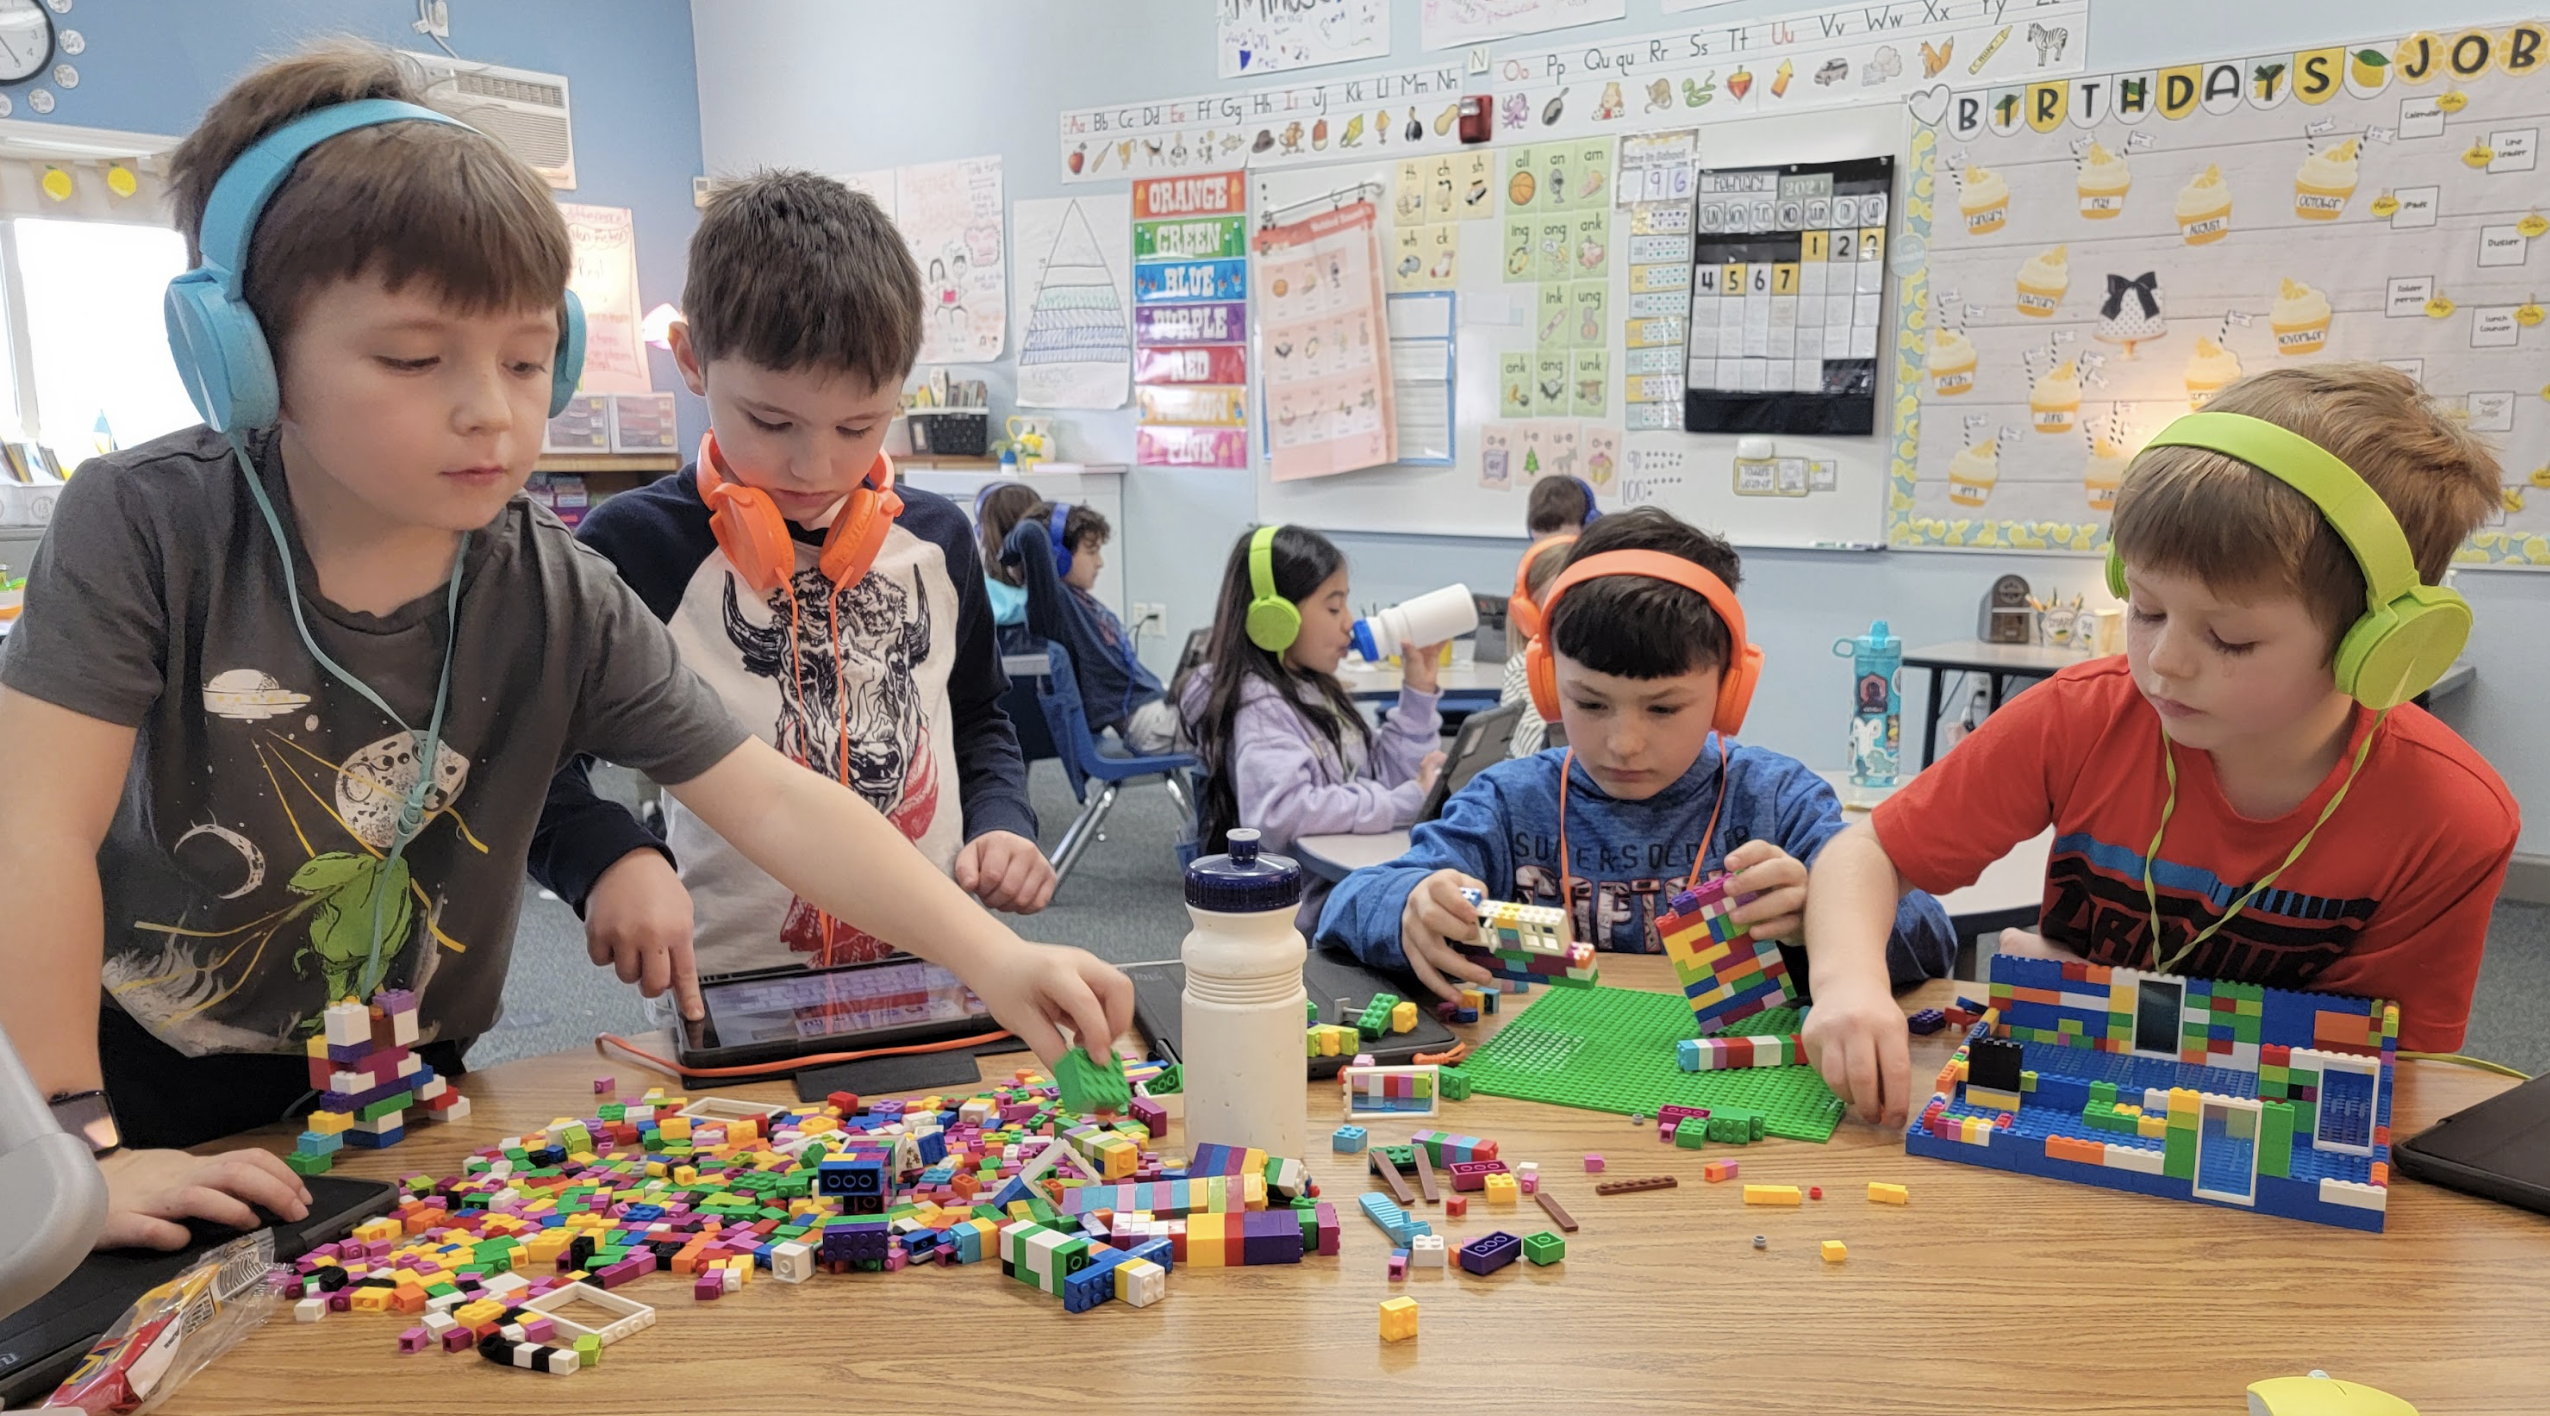 Students play with legos